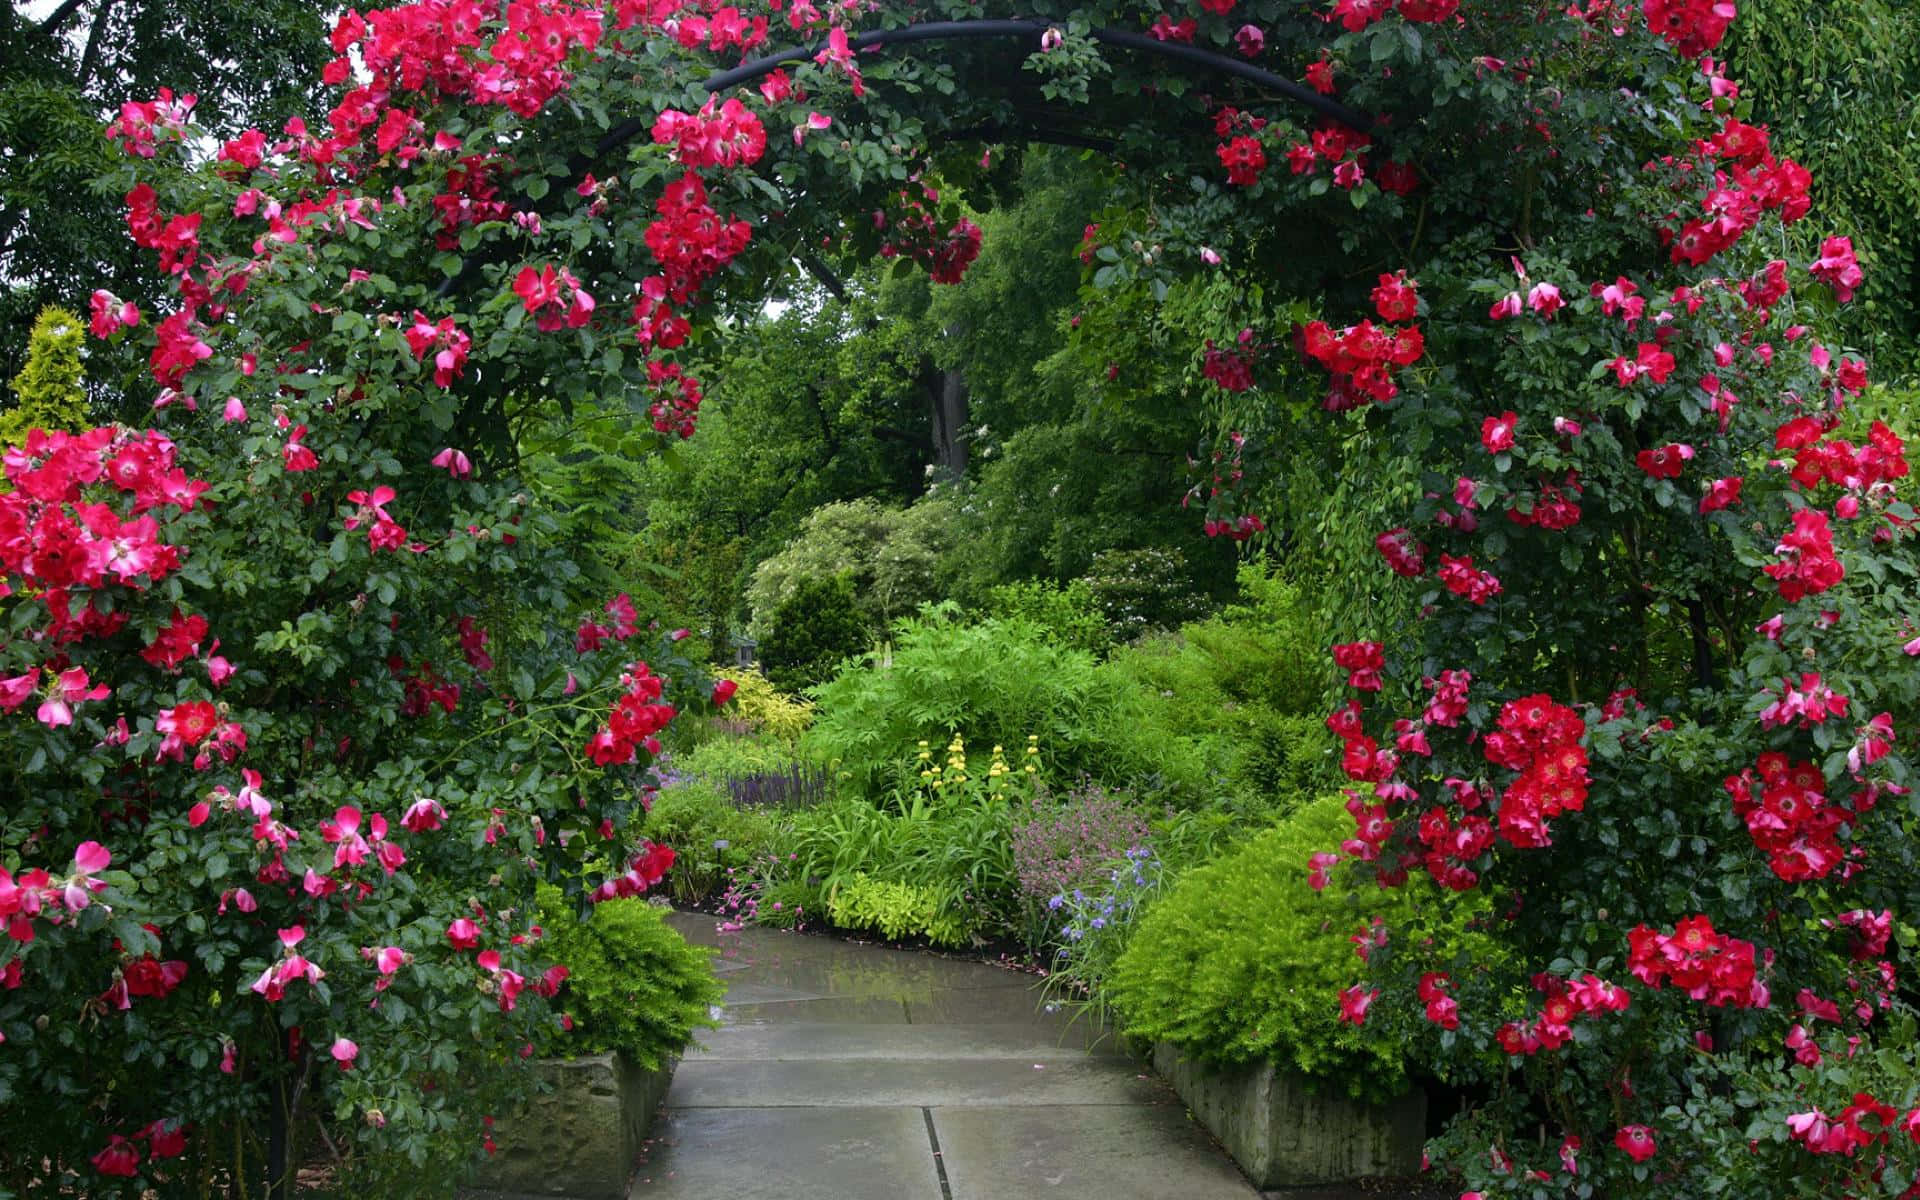 A Magical Garden Pathway Surrounded by Blooming Flowers and Lush Greenery Wallpaper